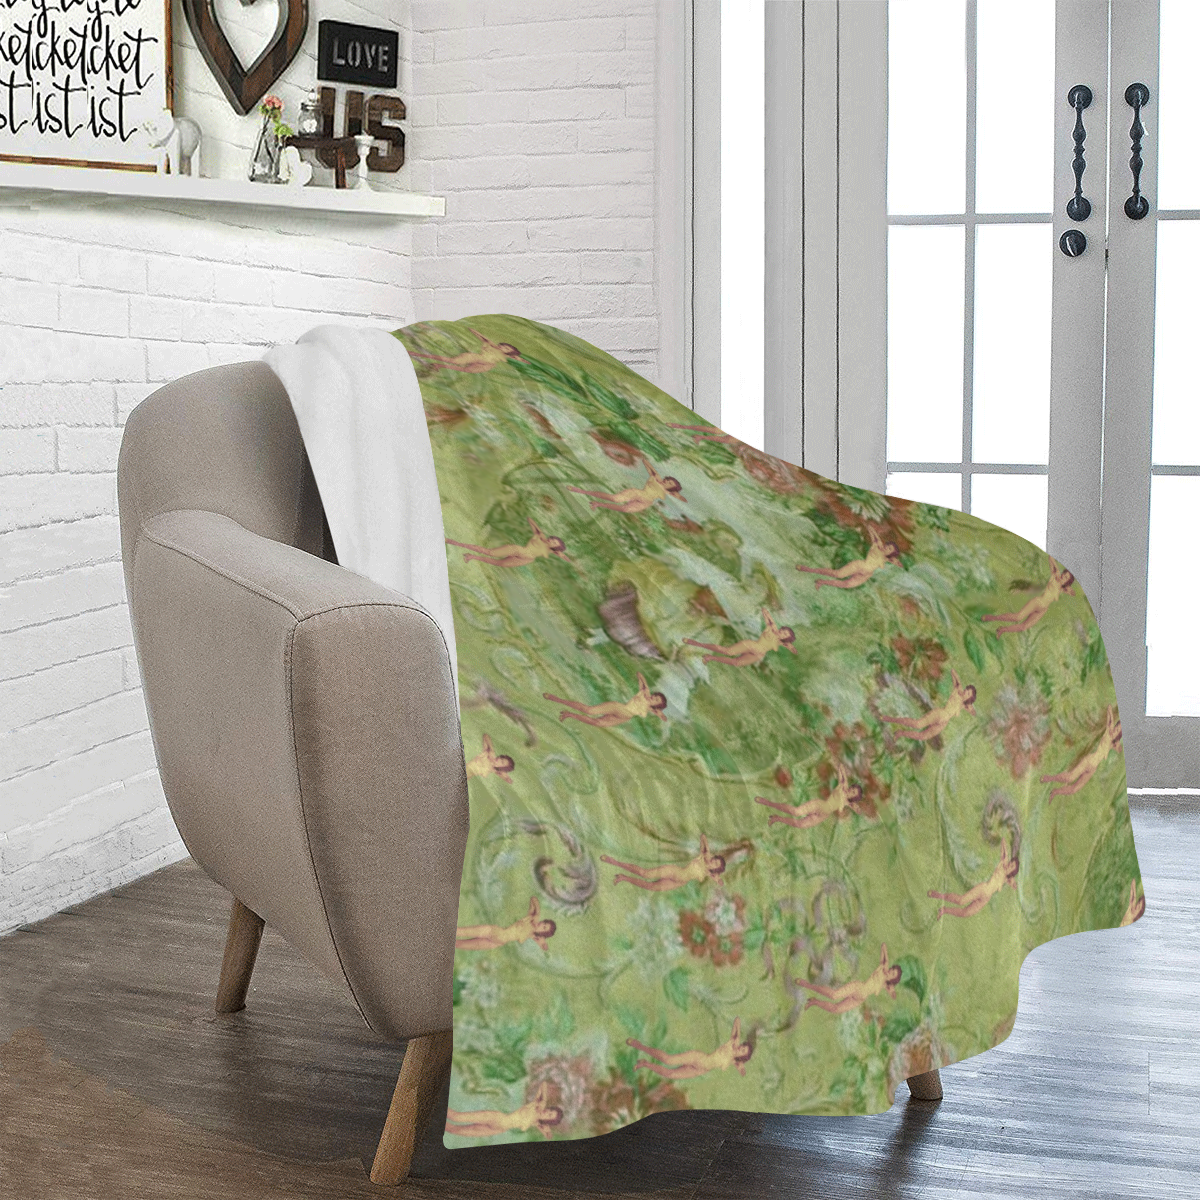 The Great Outdoors 2 Ultra-Soft Micro Fleece Blanket 50"x60"